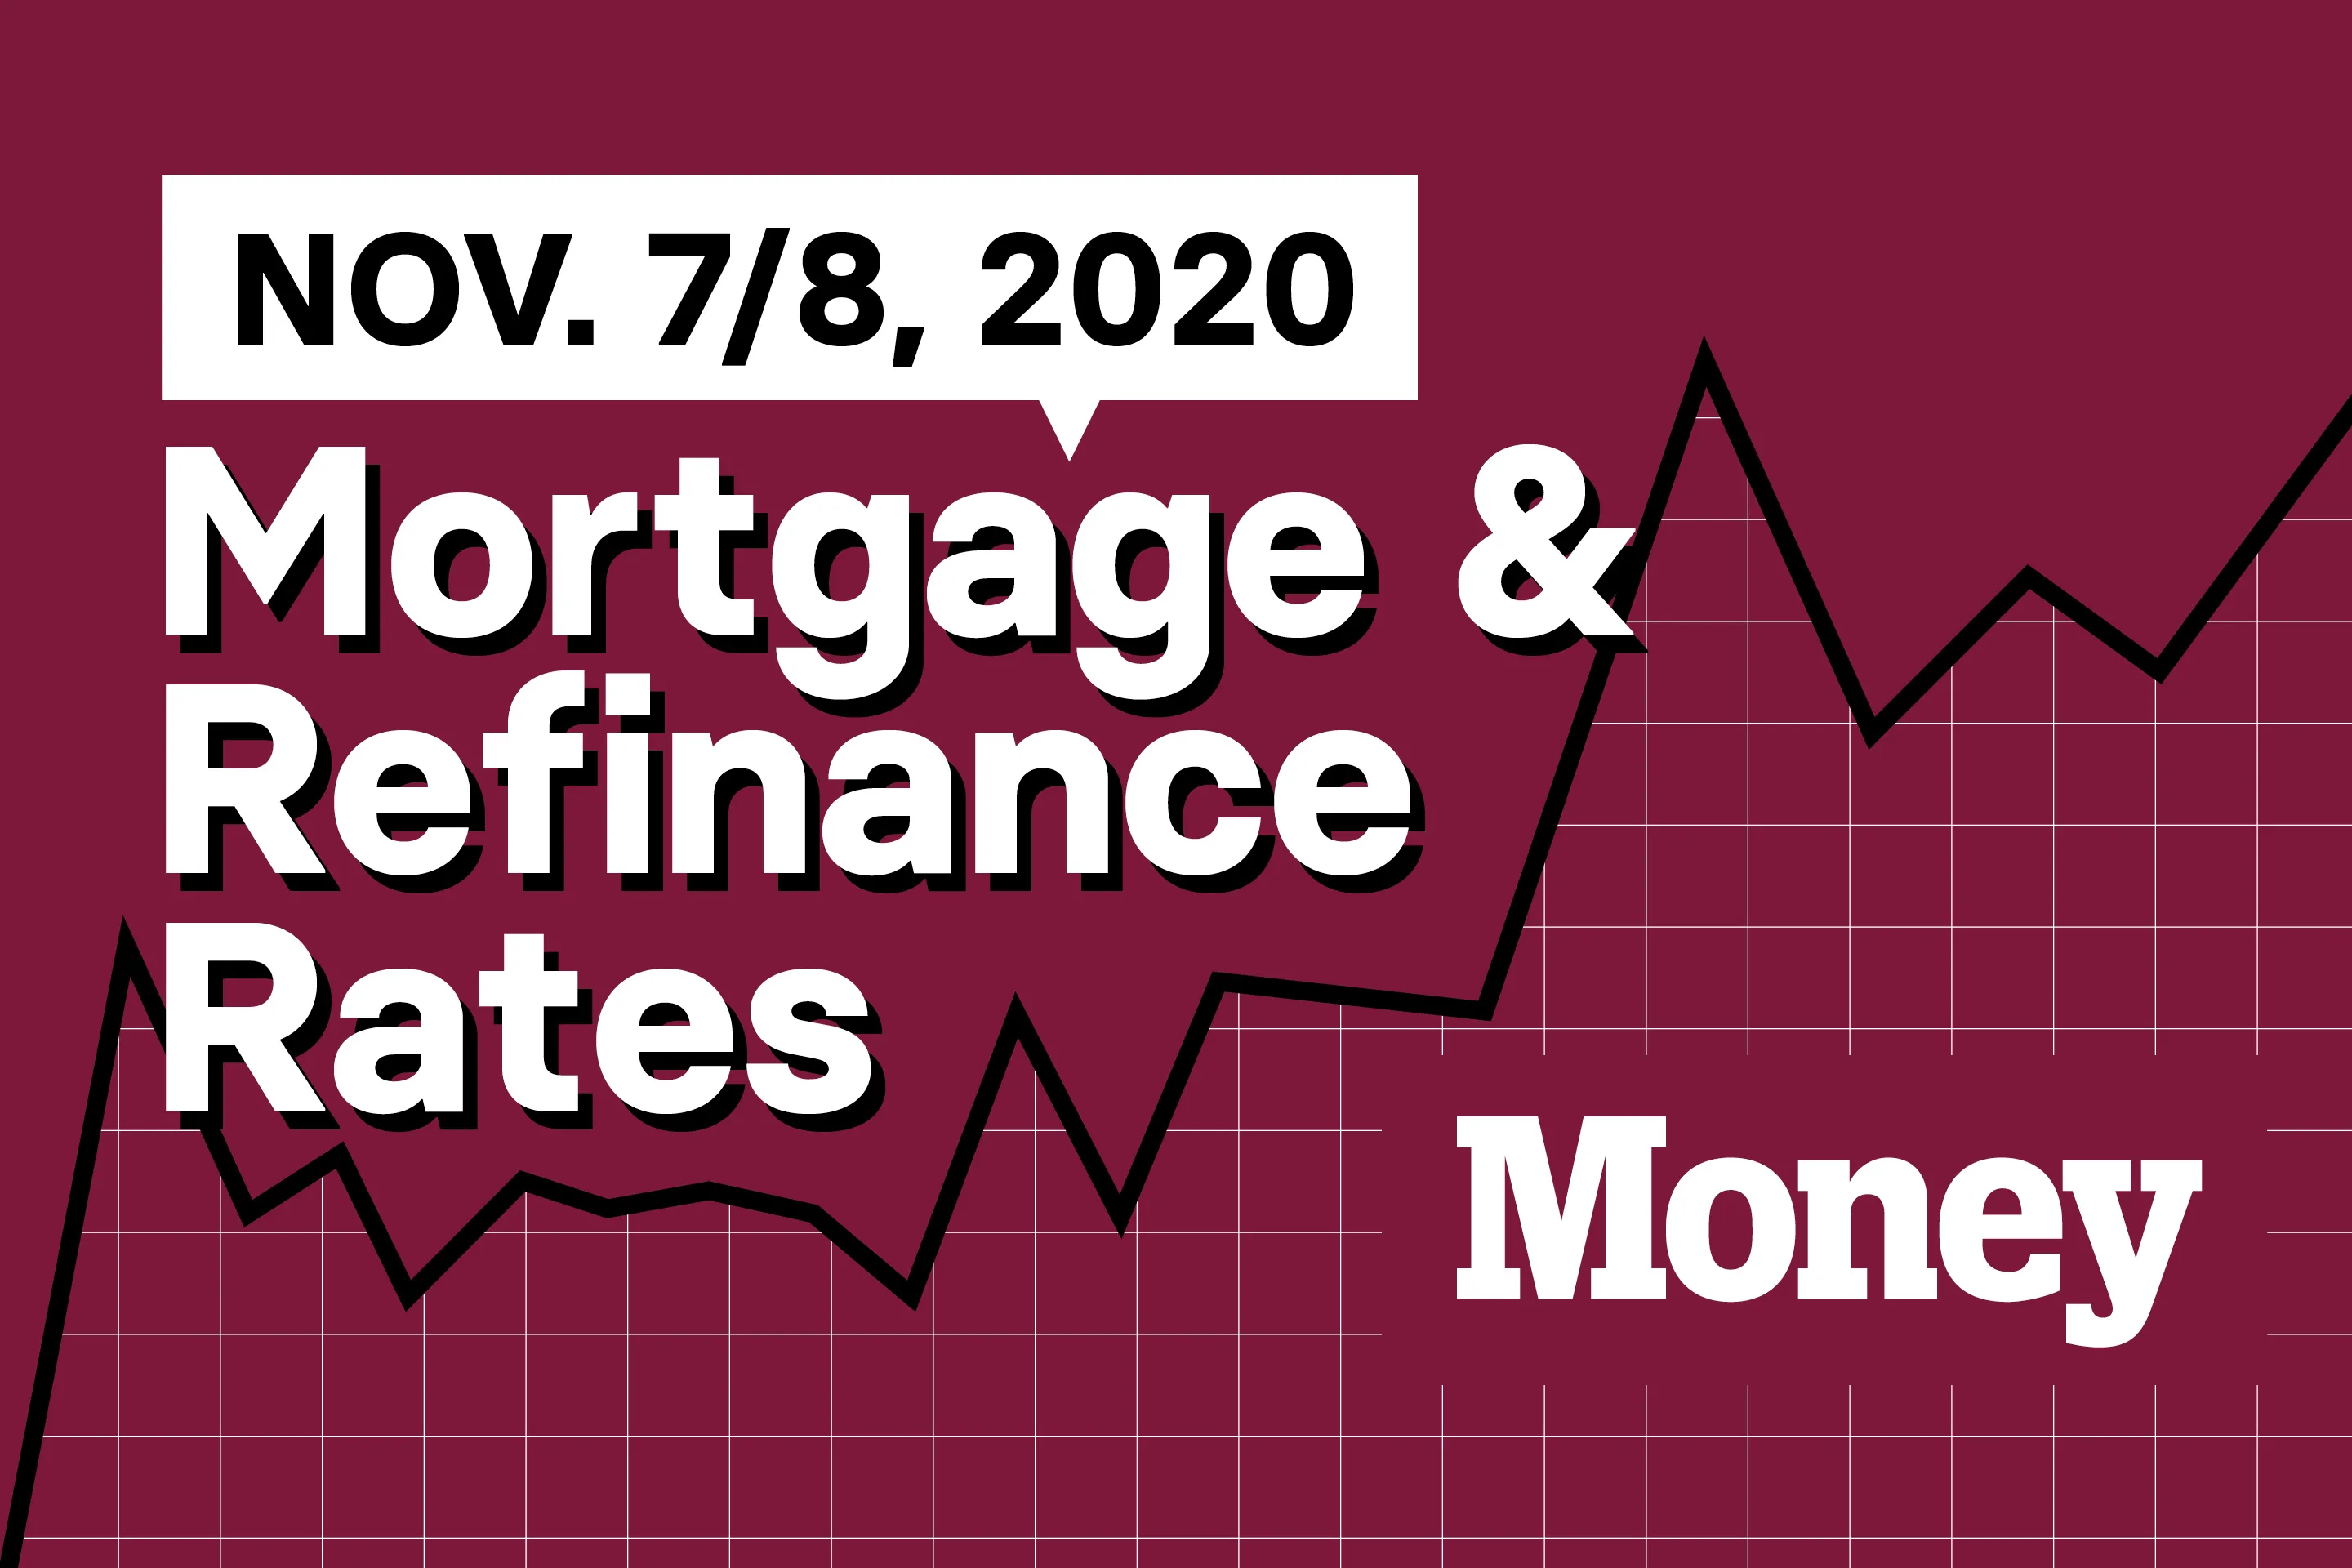 Today's Mortgage and Refinance Rates for November 7 and 8